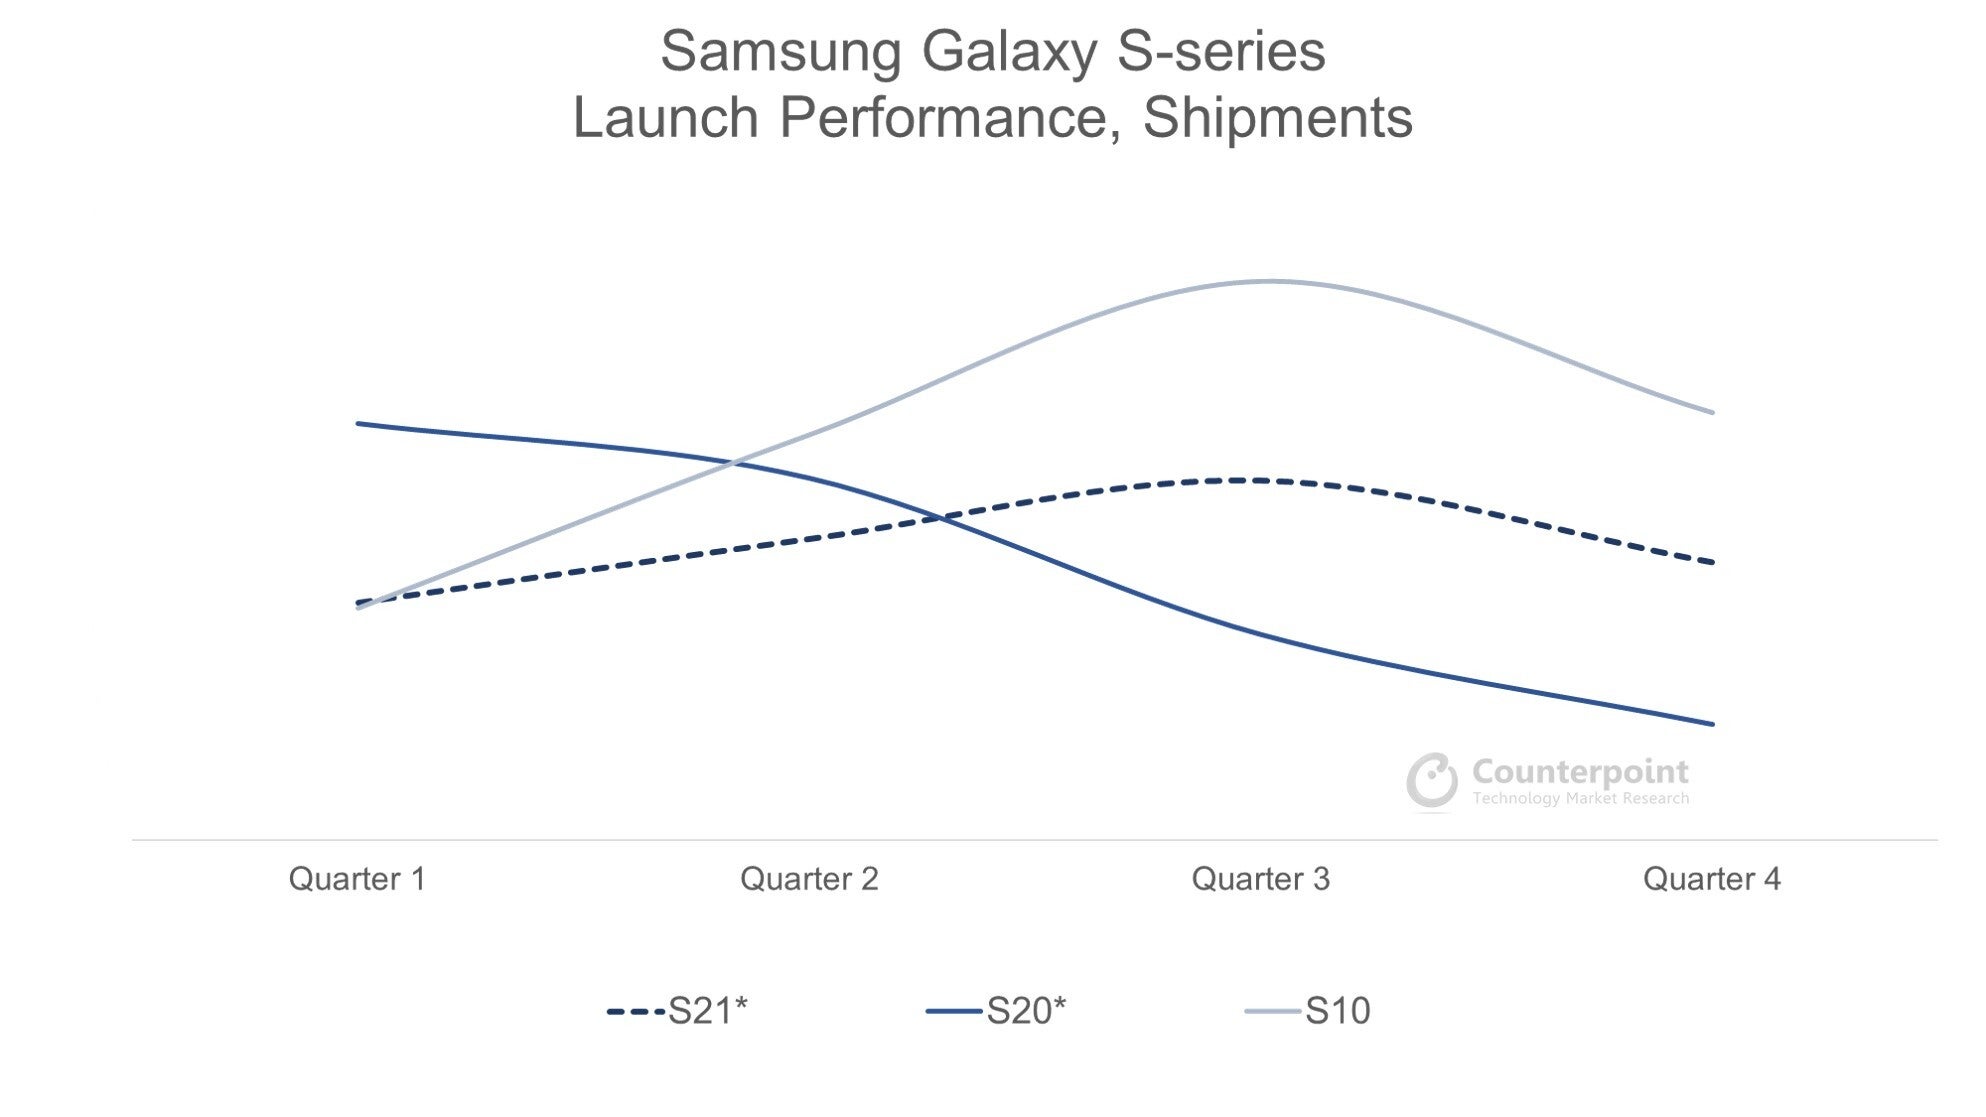 &nbsp;Source -Counterpoint Research. *Includes forecasted quarters.  - The Galaxy S21 hits the same price sweet spot as the iPhone 12, but there are more challenges ahead